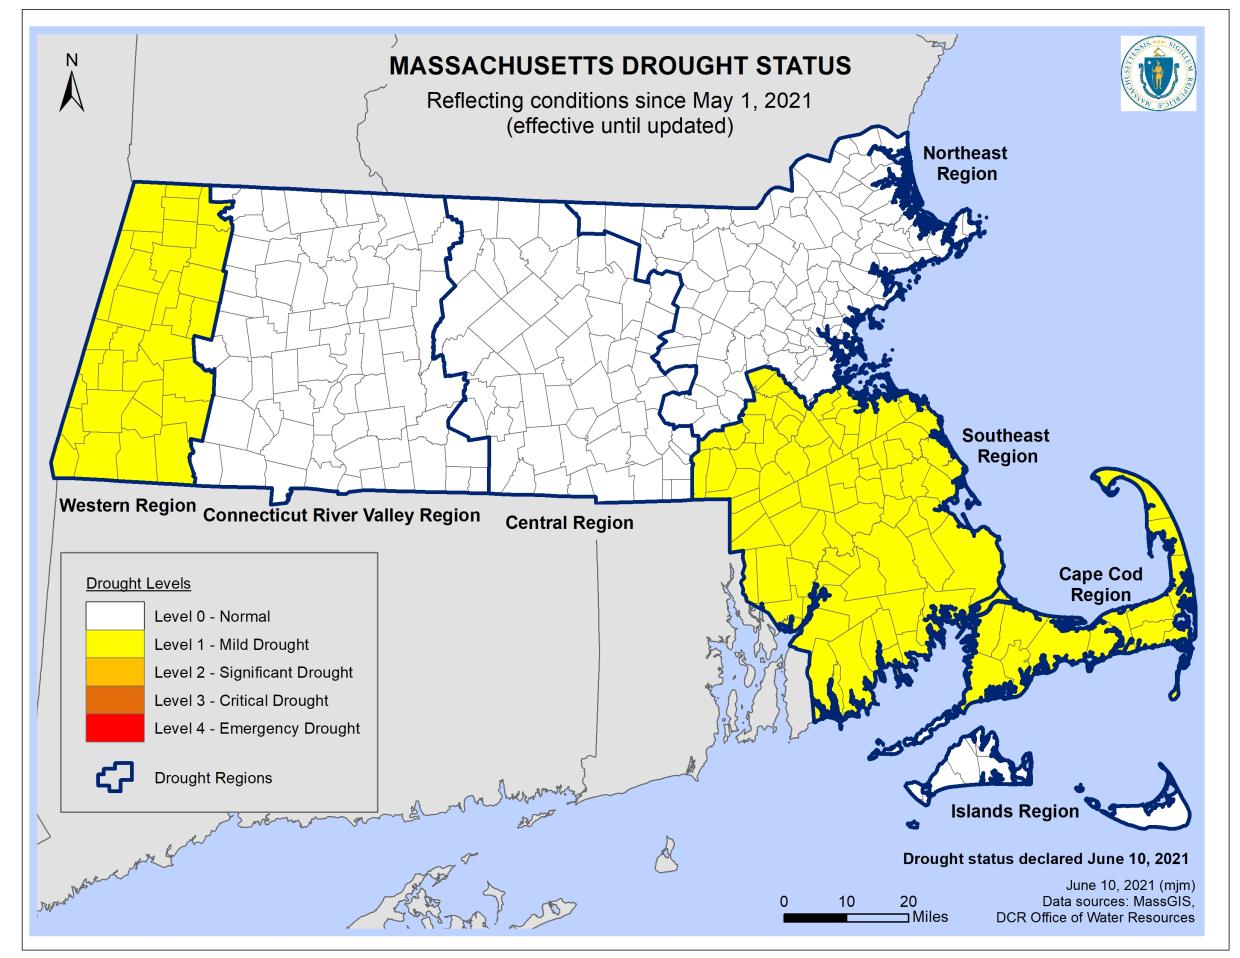 Drought Status for MA - Franklin in "Mild Drought"